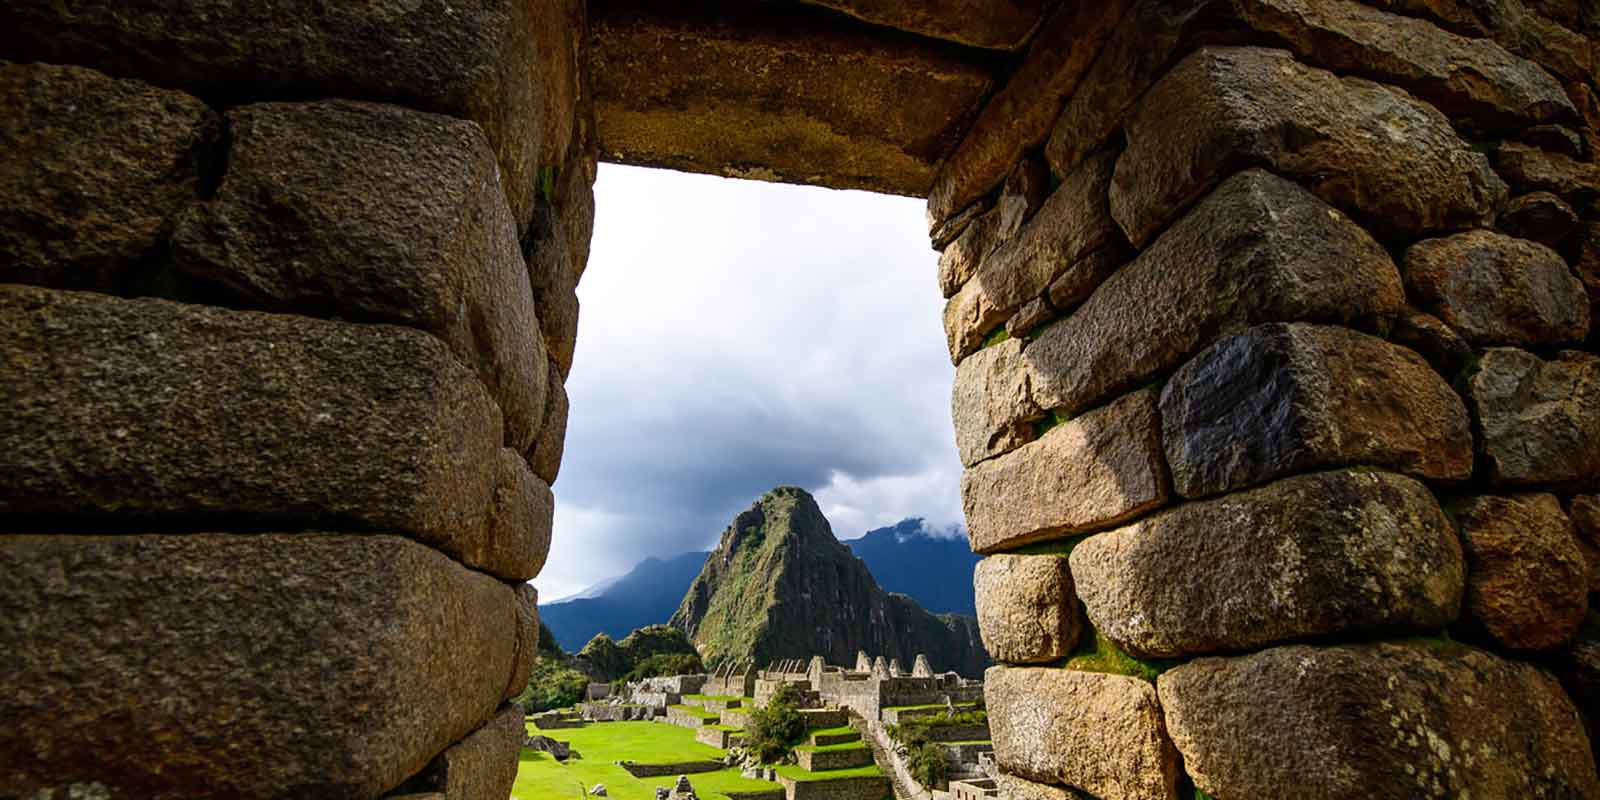 Full Day Tour to Machu Picchu by EXPEDITION train